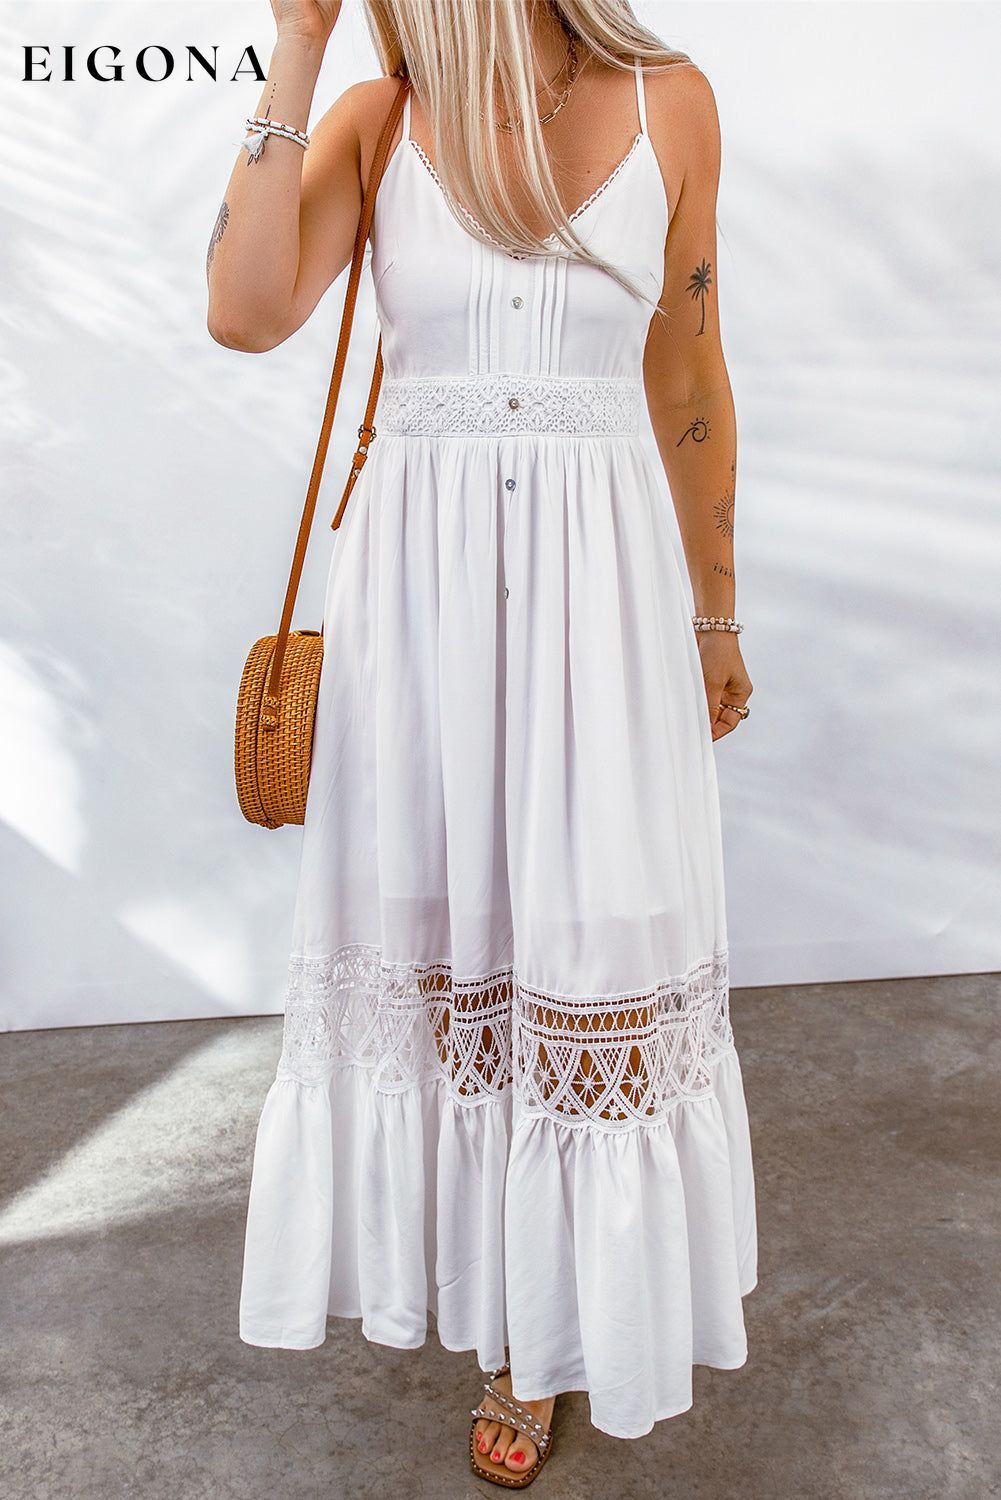 Buttoned Spliced Lace Spaghetti Strap Maxi Dress White S casual dress casual dresses clothes dress dresses maxi dress maxi dresses Ship From Overseas SYNZ